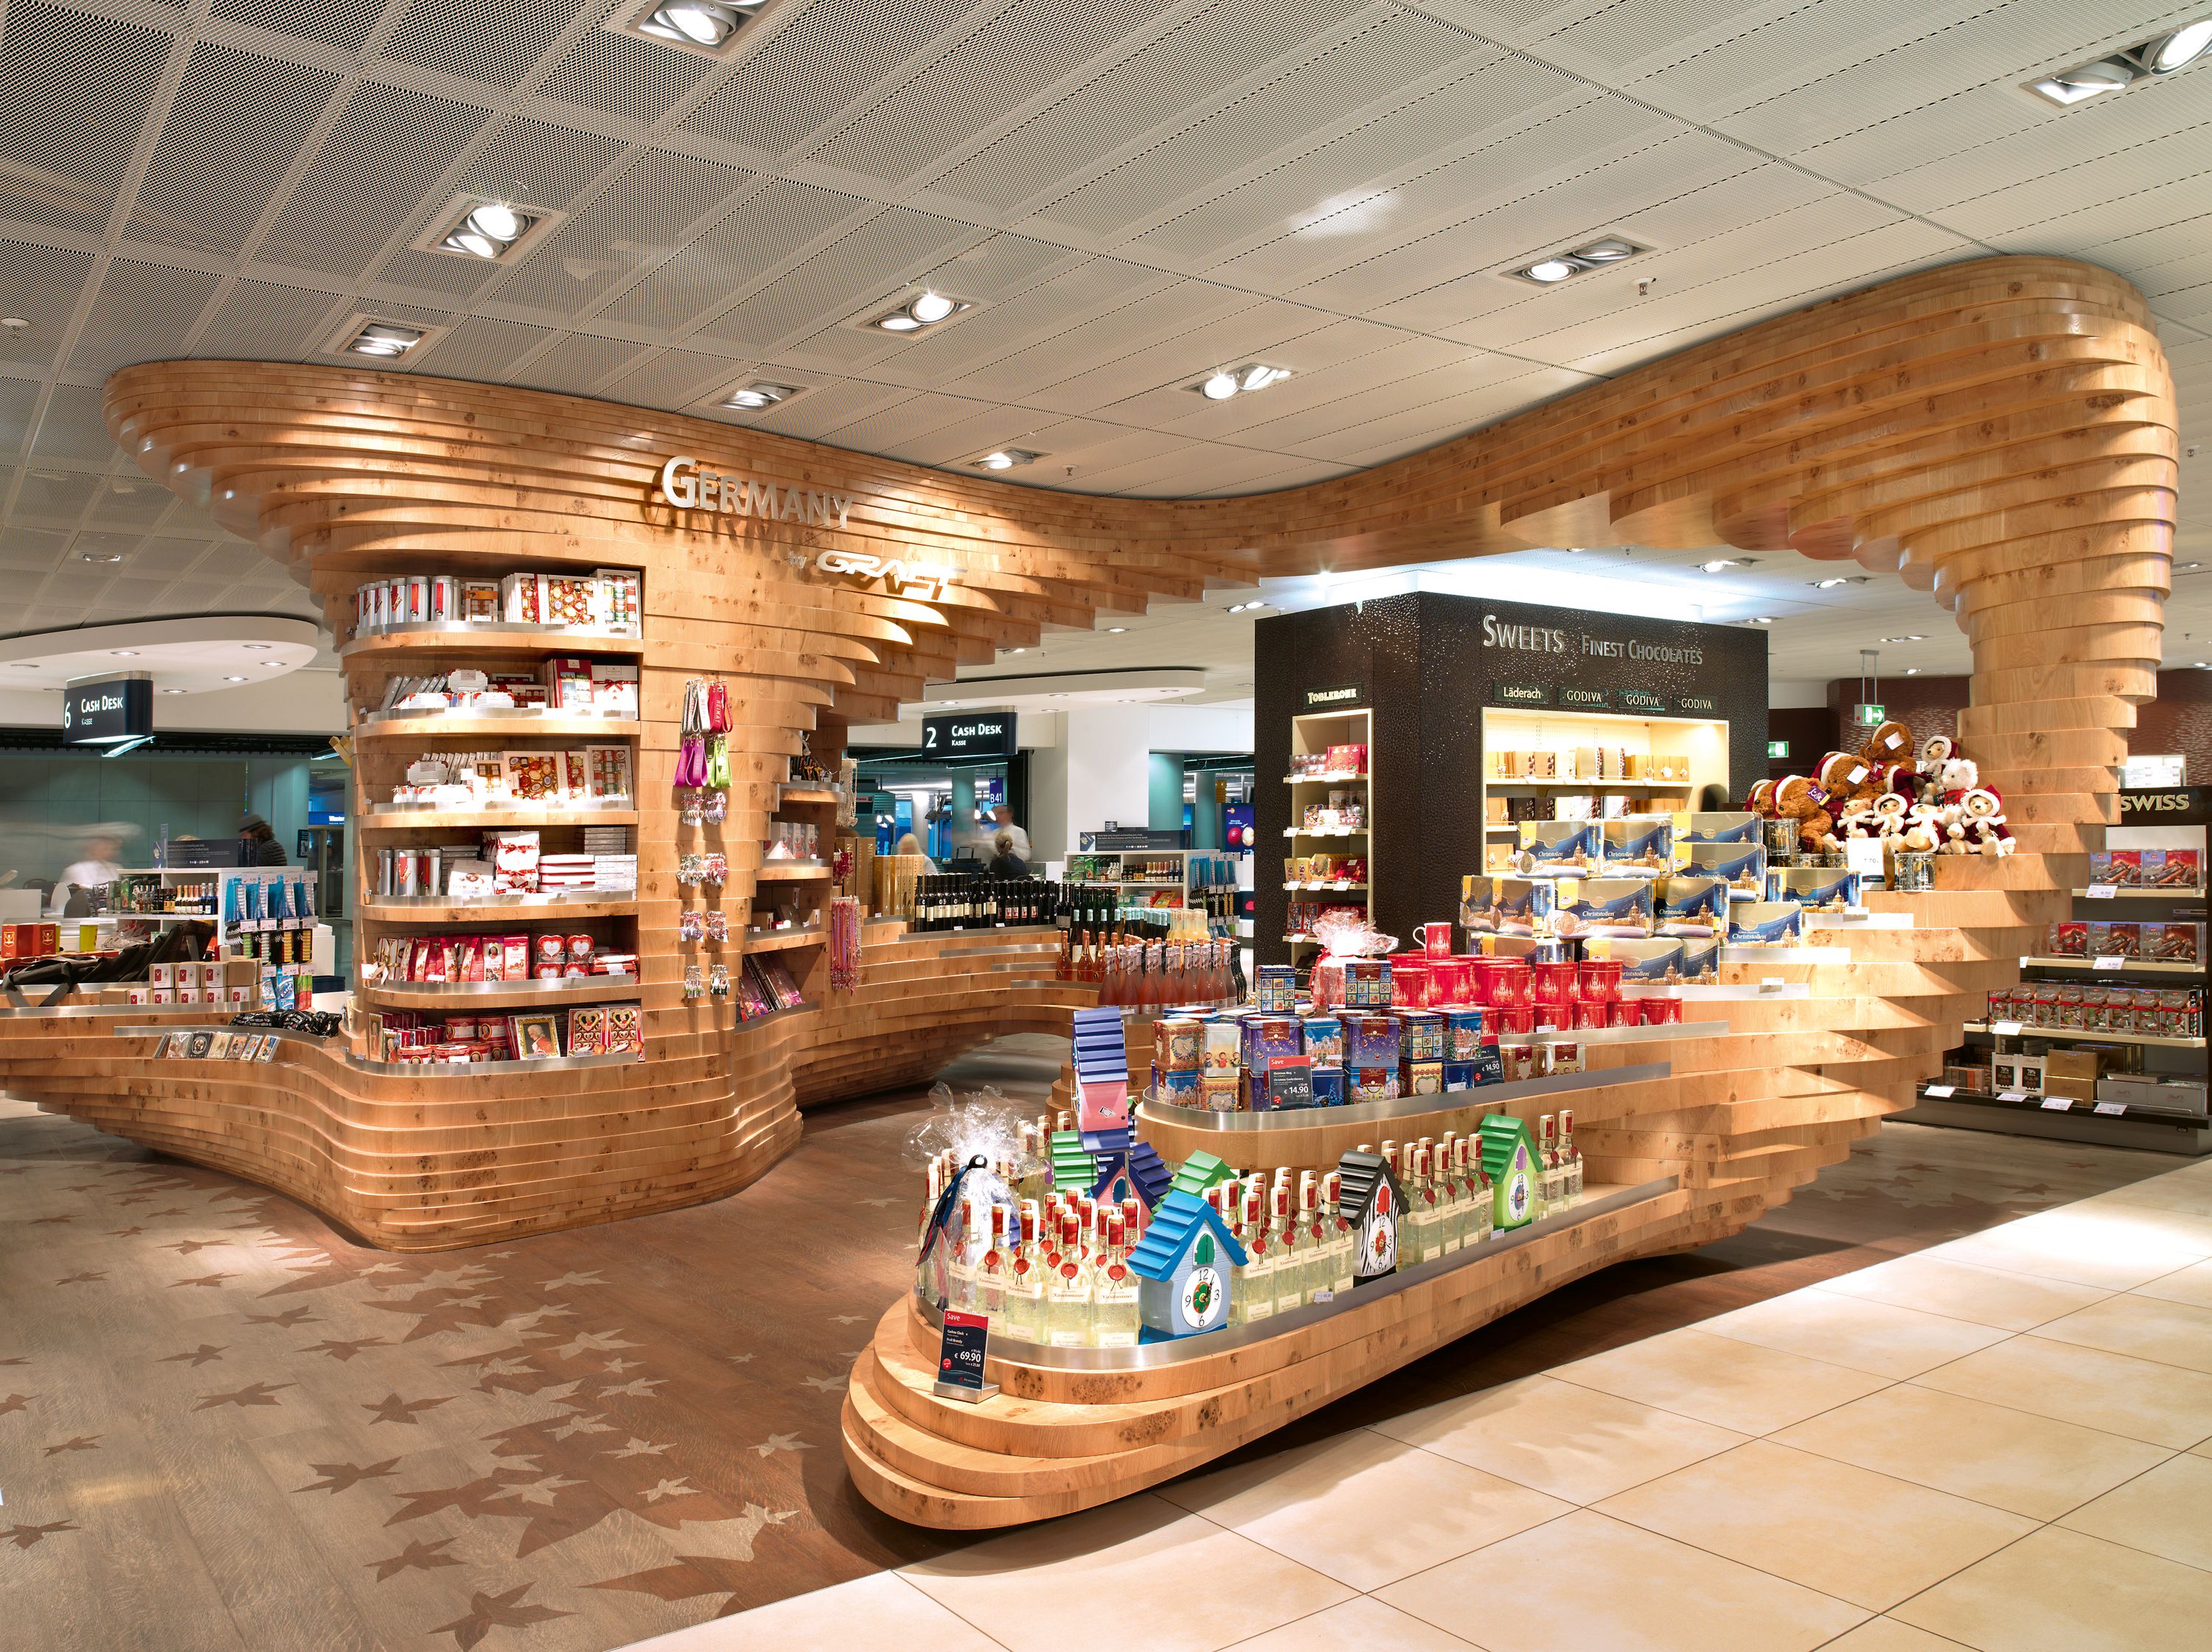 GRAFT designed forest-themed installations for the “Made in Germany” regional specialty areas of three different Heinemann duty free shops: Dynamic tree sculptures made of stacked layers of oak that serve as eye-catching centerpieces for shoppers.